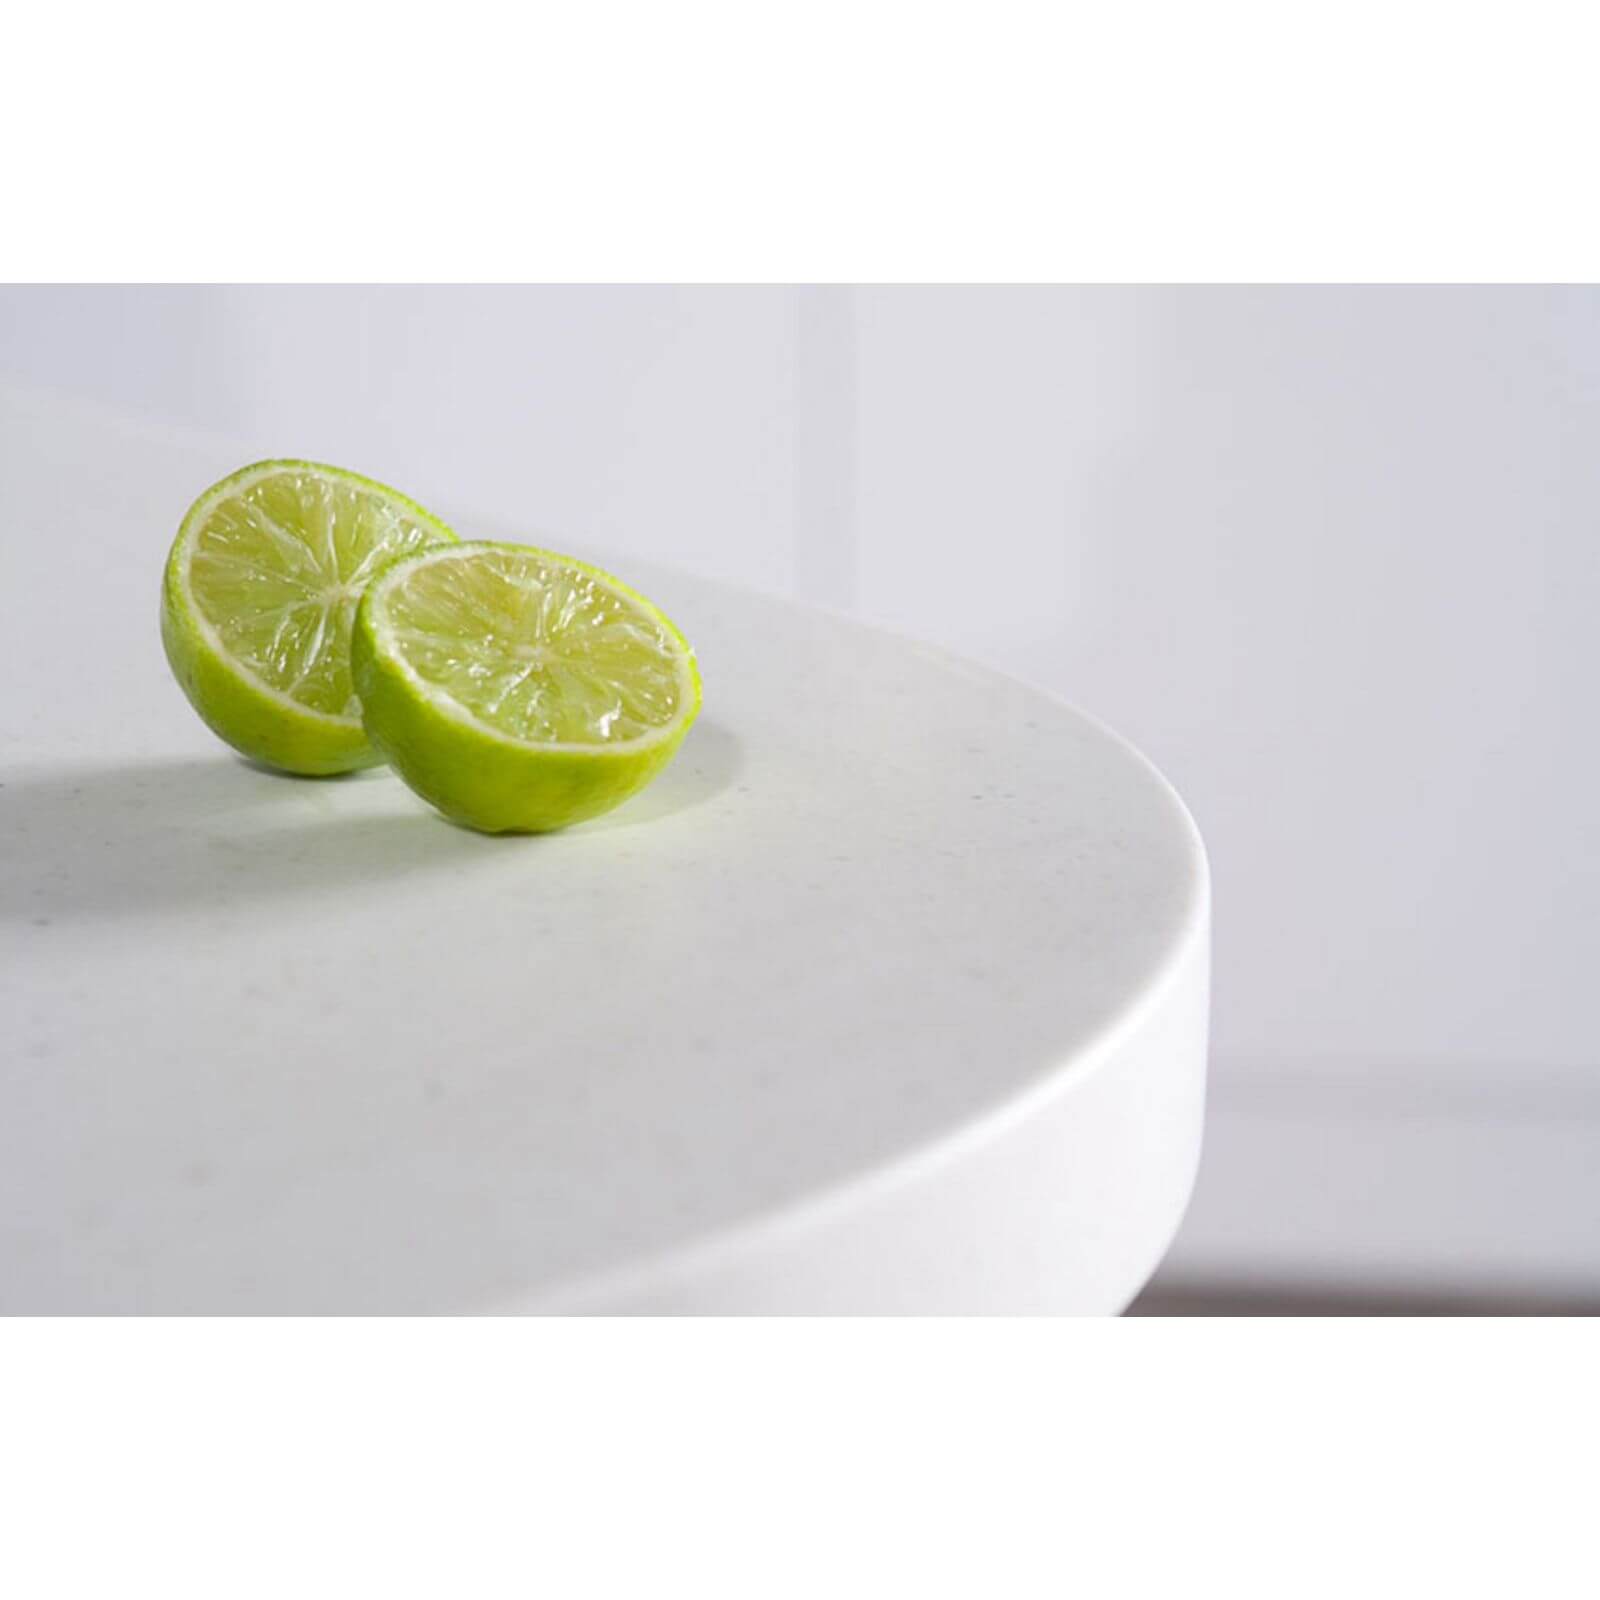 Maia Calcite Kitchen Sink Worktop - Acrylic Right Hand Bowl - 1800 x 650 x 28mm